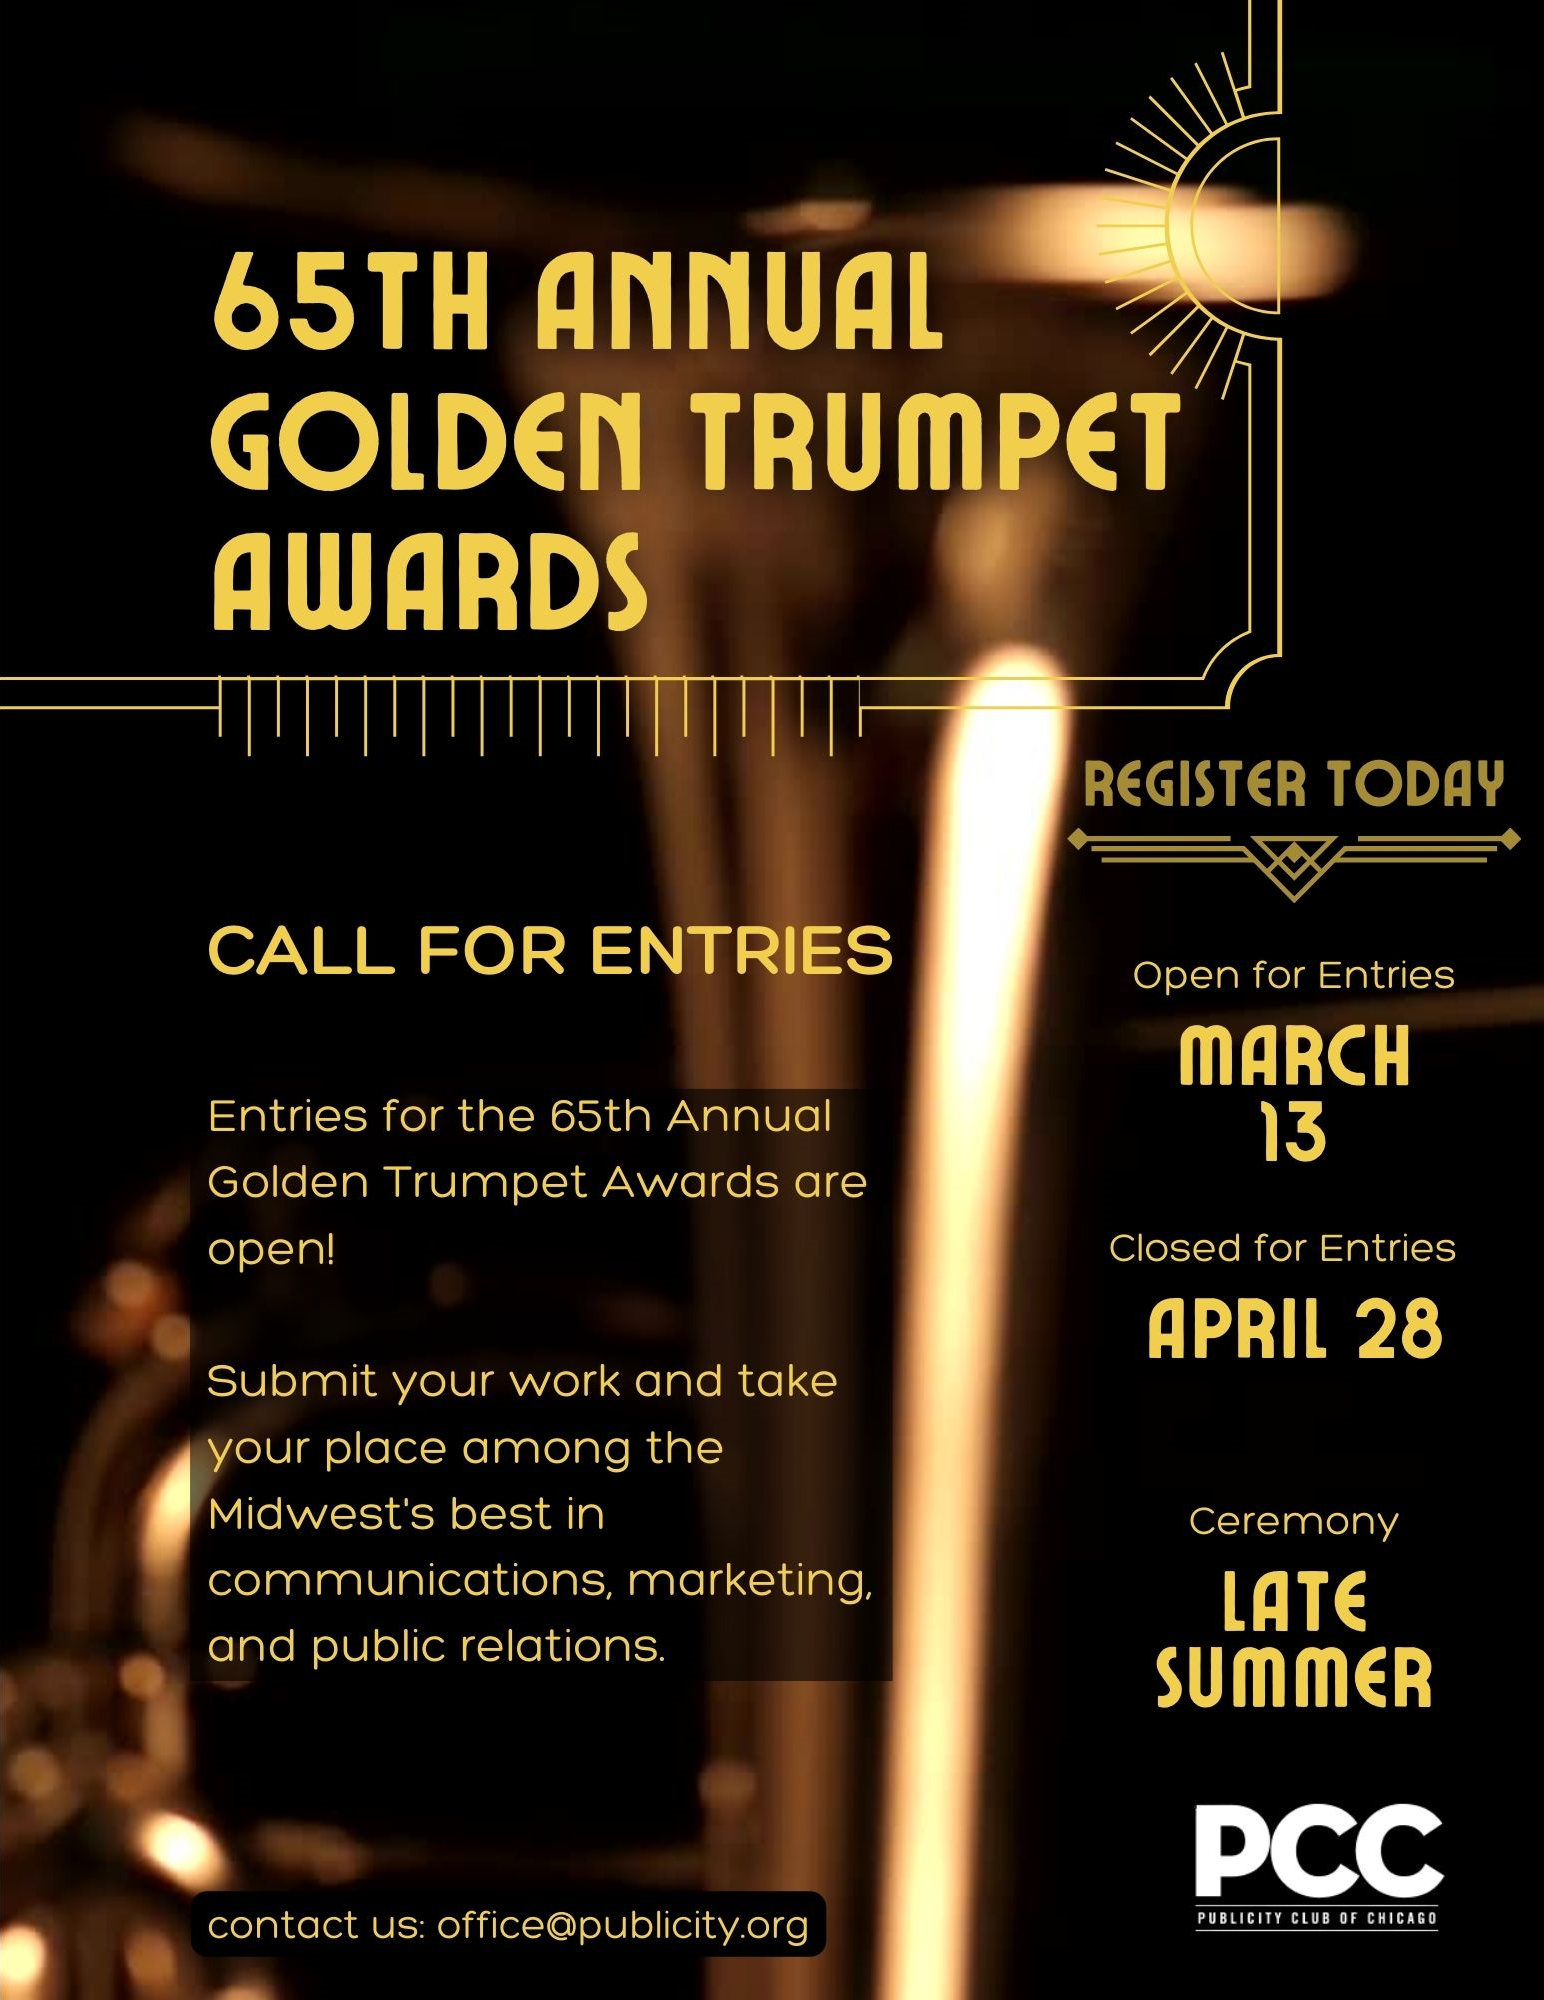 The 65th Annual Golden Trumpet Awards